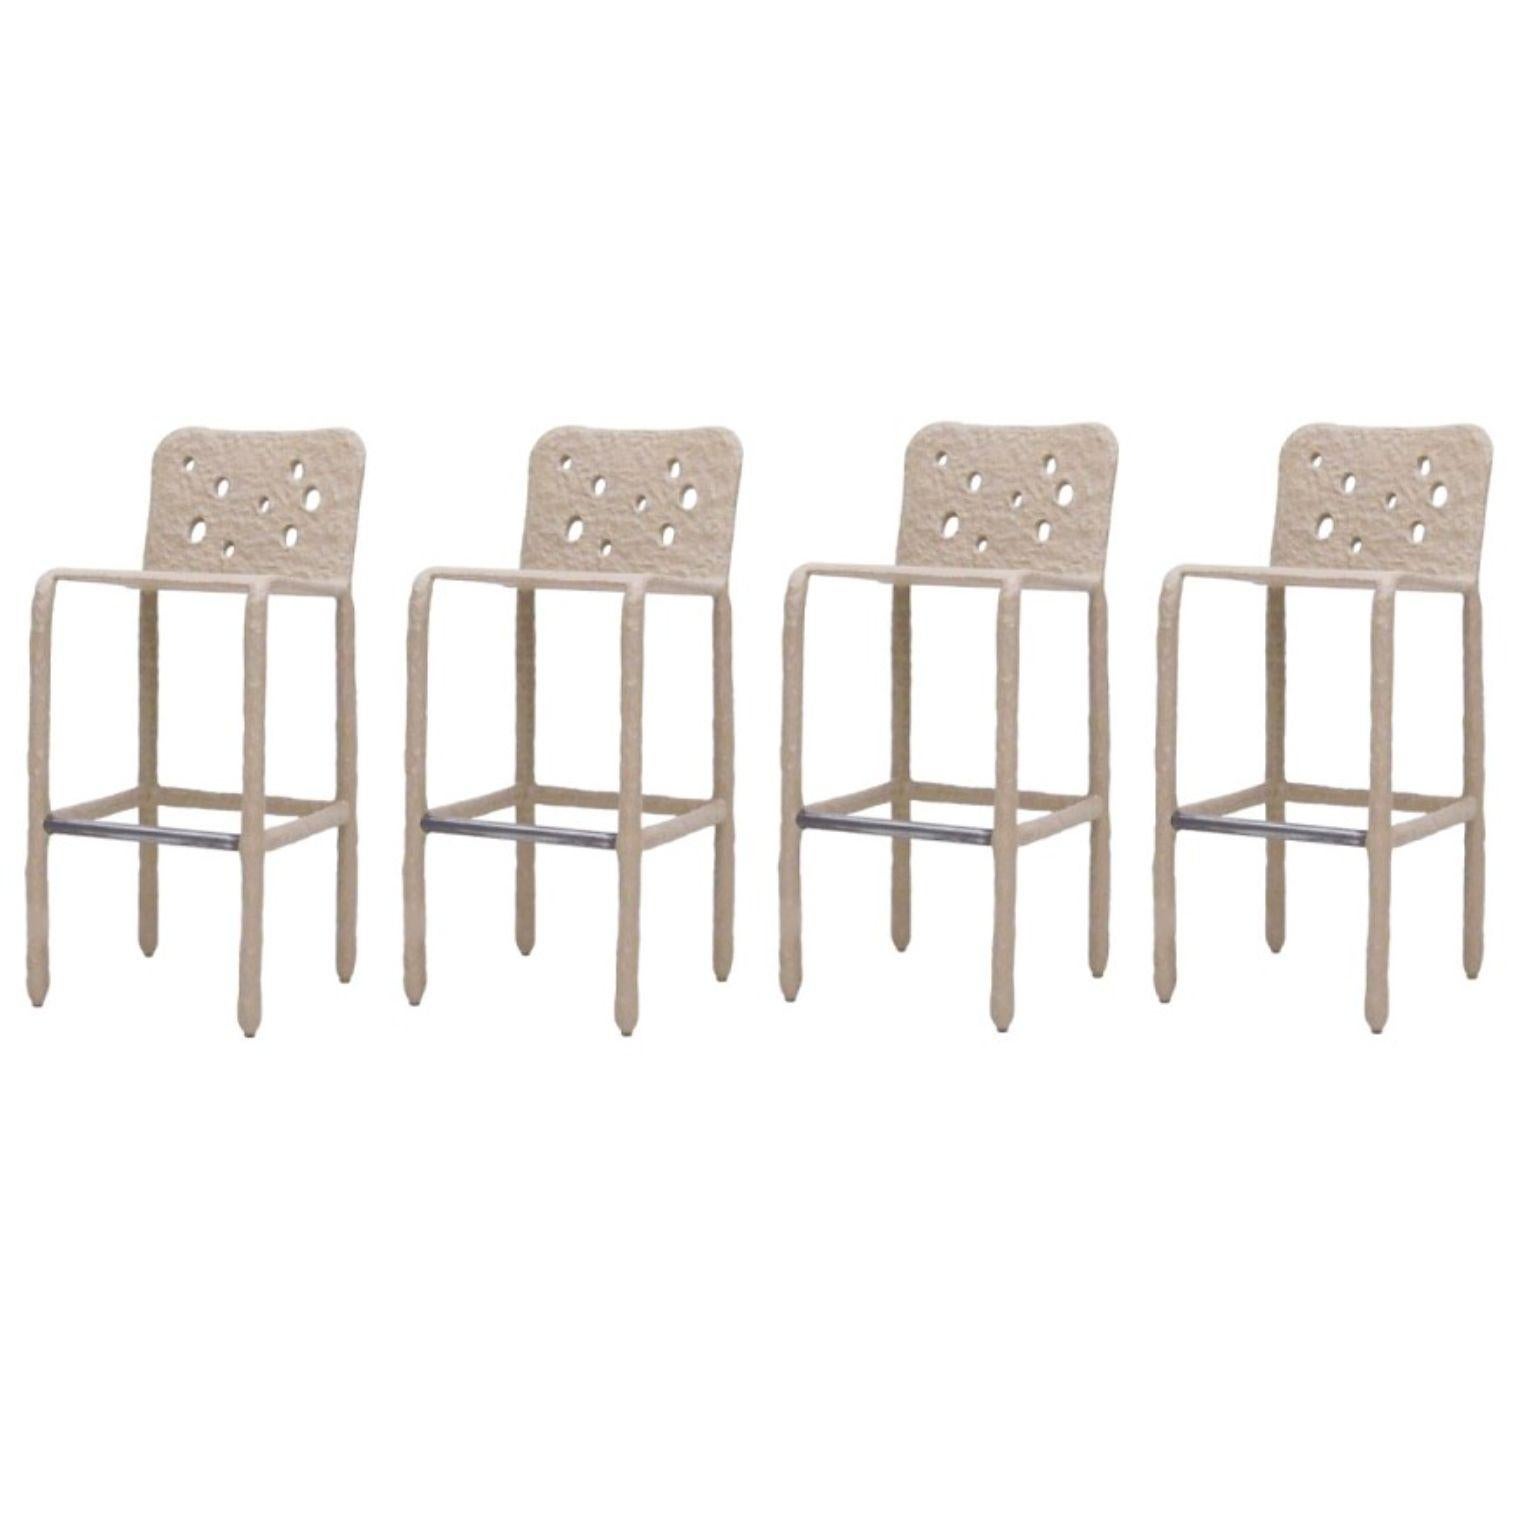 Set of 4 Outdoor Beige sculpted Contemporary chairs by Faina
Design: Victoriya Yakusha
Material: steel, flax rubber, biopolymer, cellulose
Dimensions: Height: 106 x Width: 45 x Sitting place width: 49 Legs height: 80 cm
Weight: 20